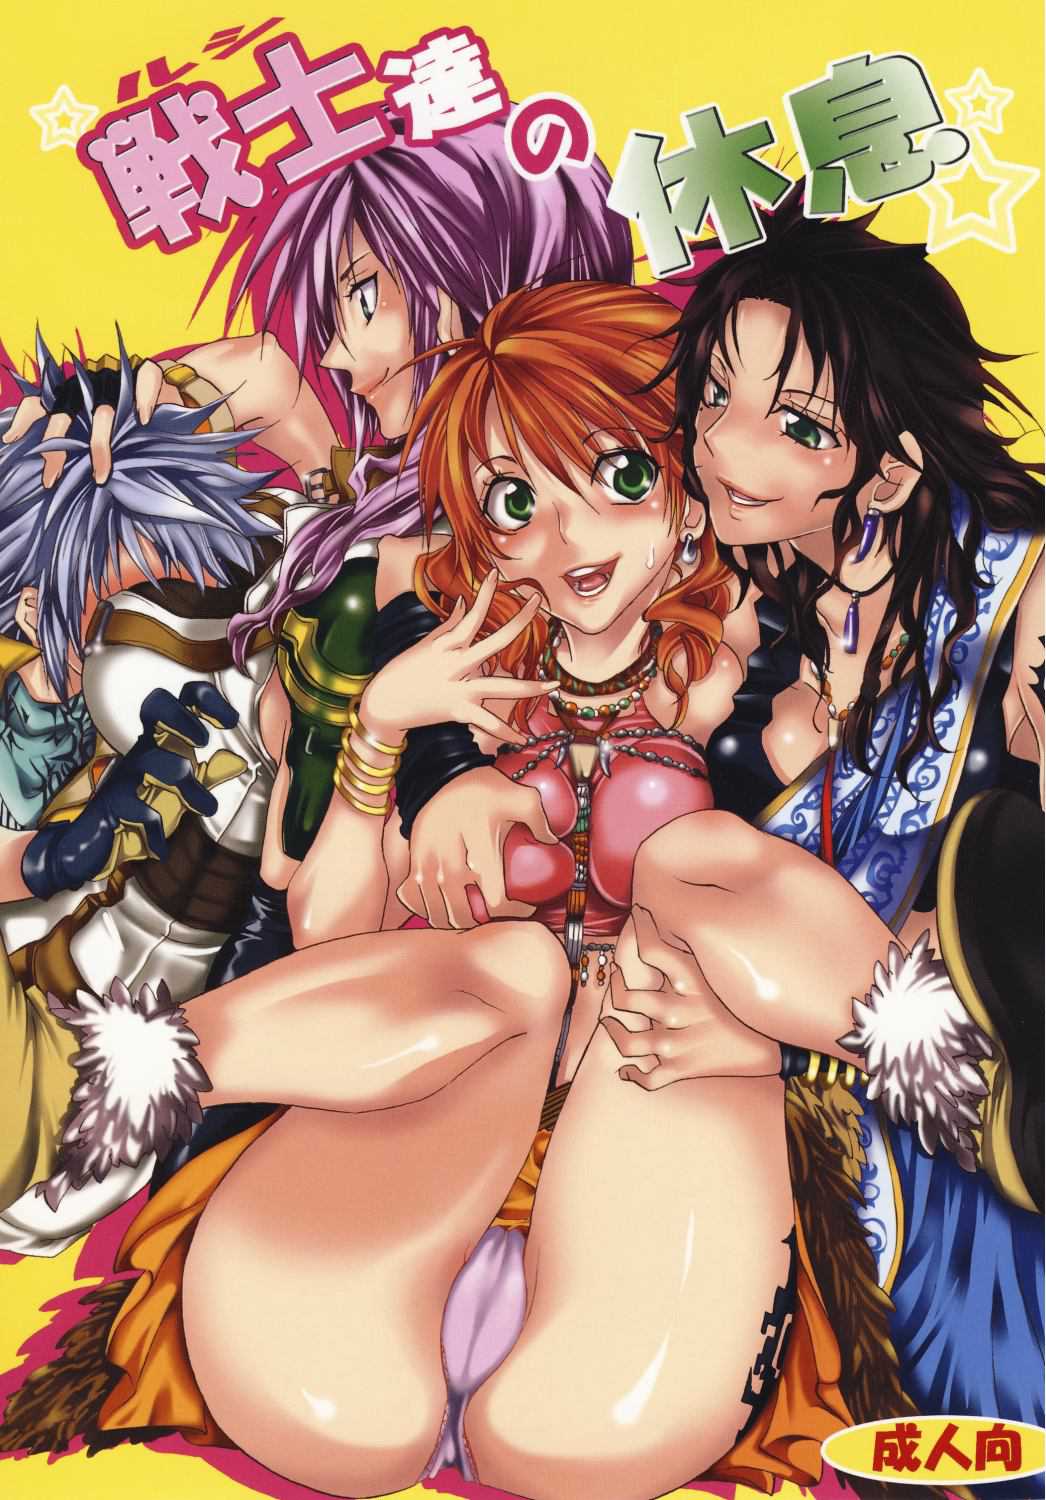 Reading Final Fantasy Xiii Dj On Holiday With L Cie And Friends Hentai 1 On Holiday With L